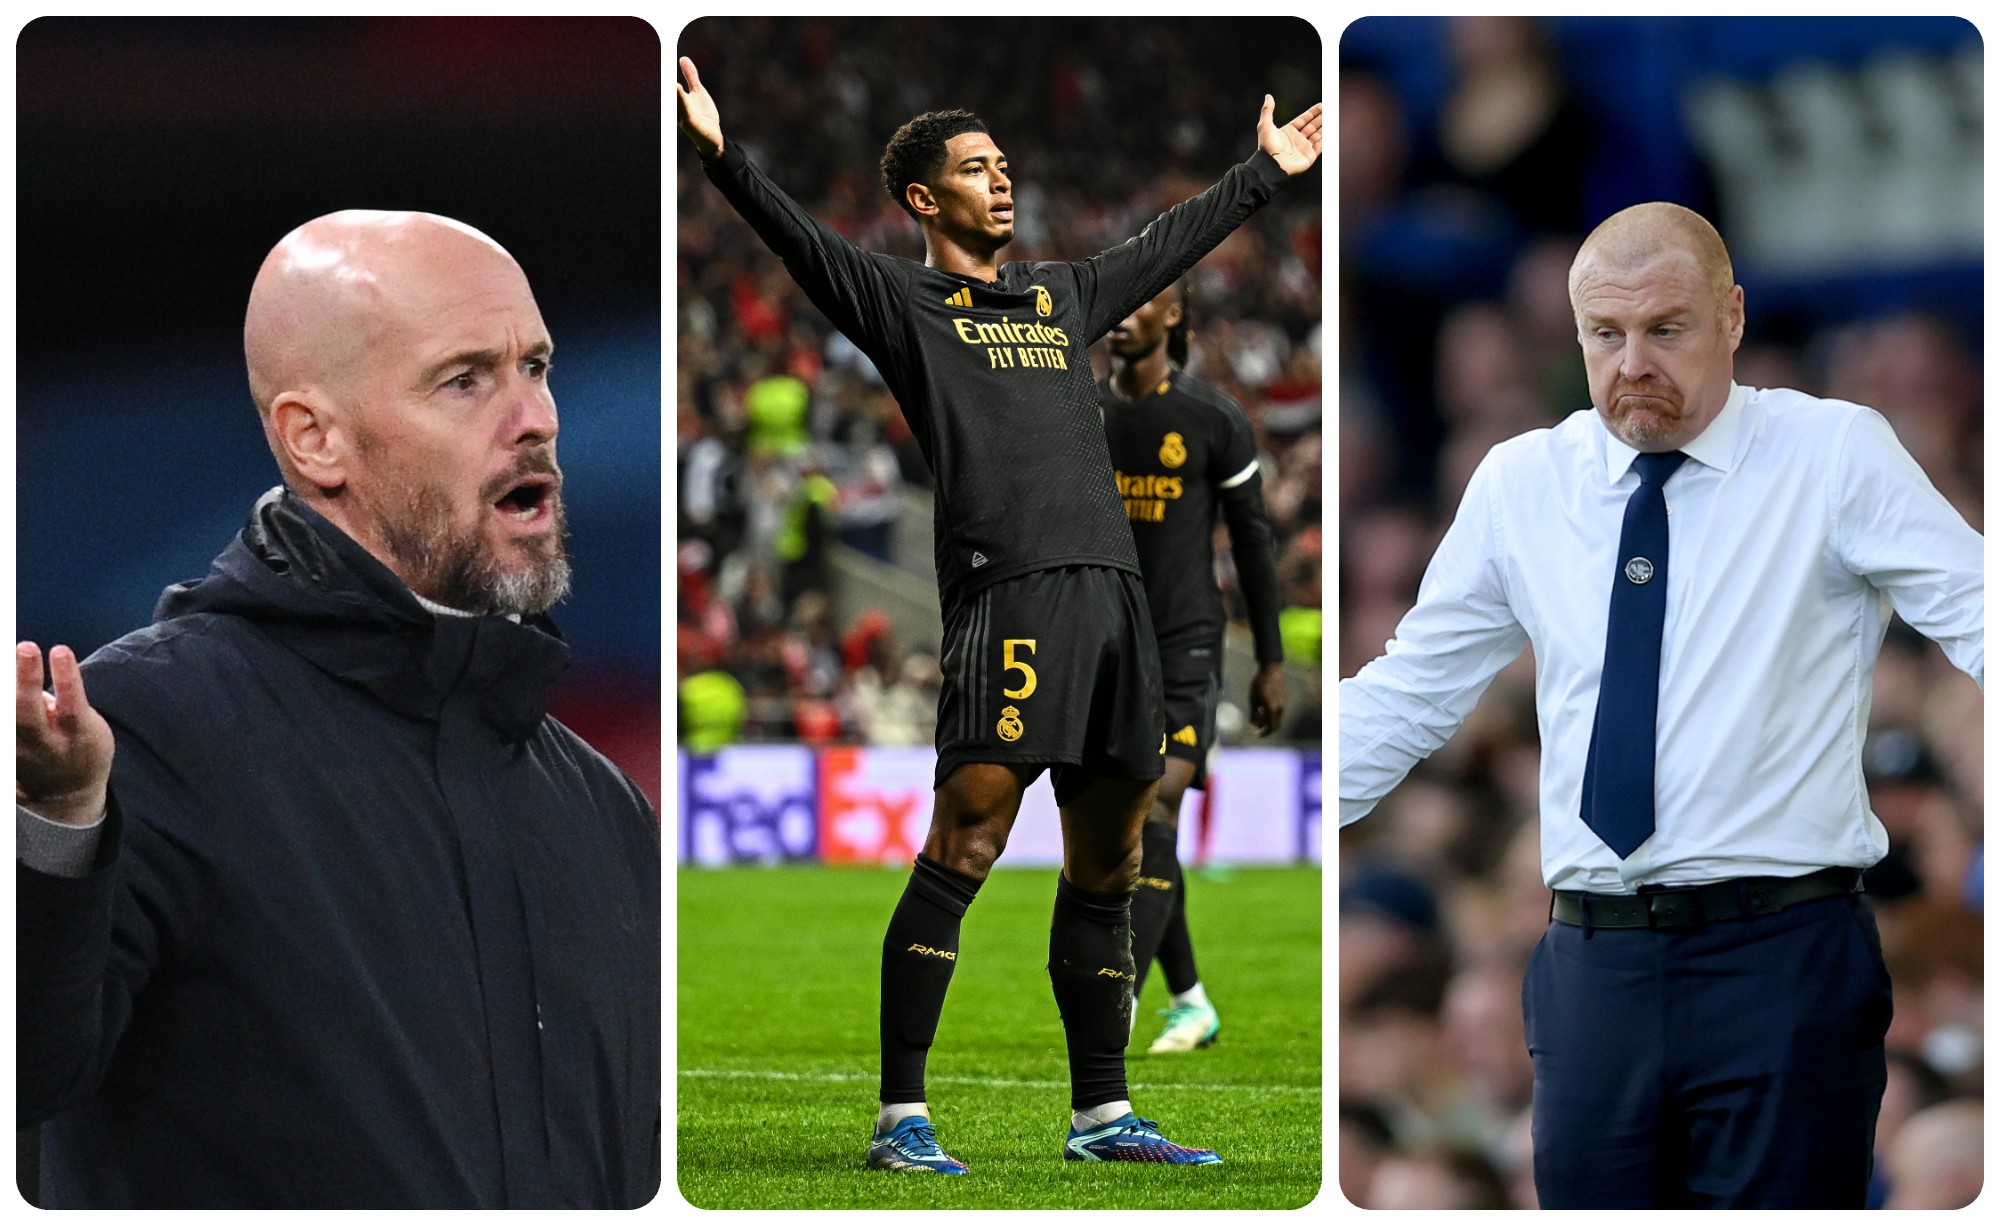 1698406925 6 Ten Hag under major pressure after abysmal signings says Collymore